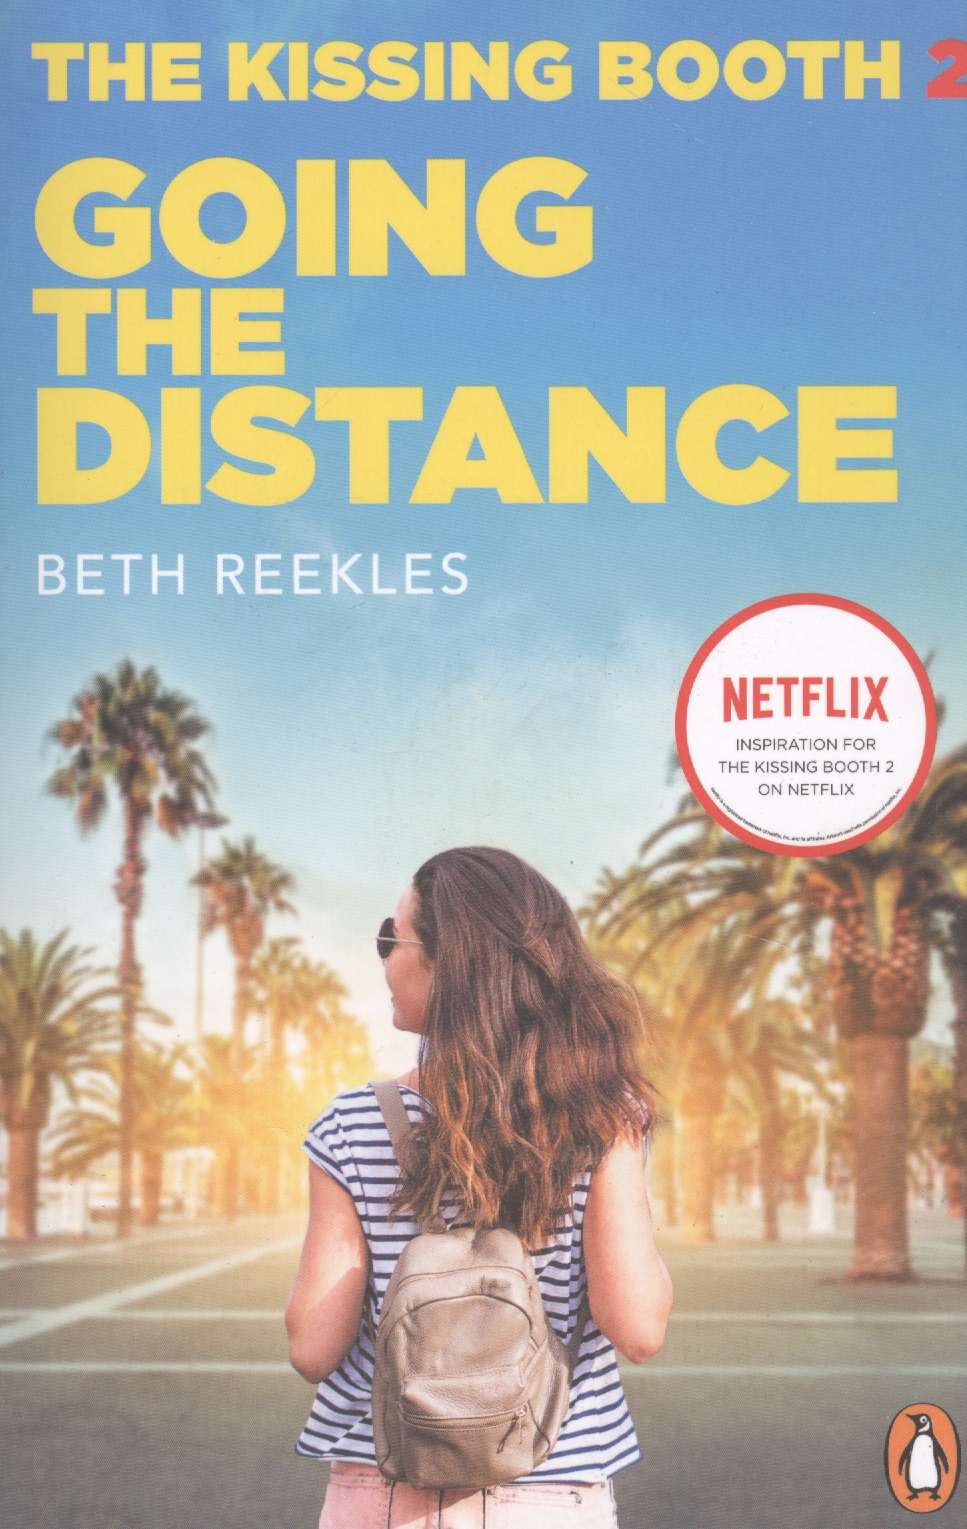 Reekles Beth The Kissing Booth 2: Going the Distance reekles beth the kissing booth 2 going the distance